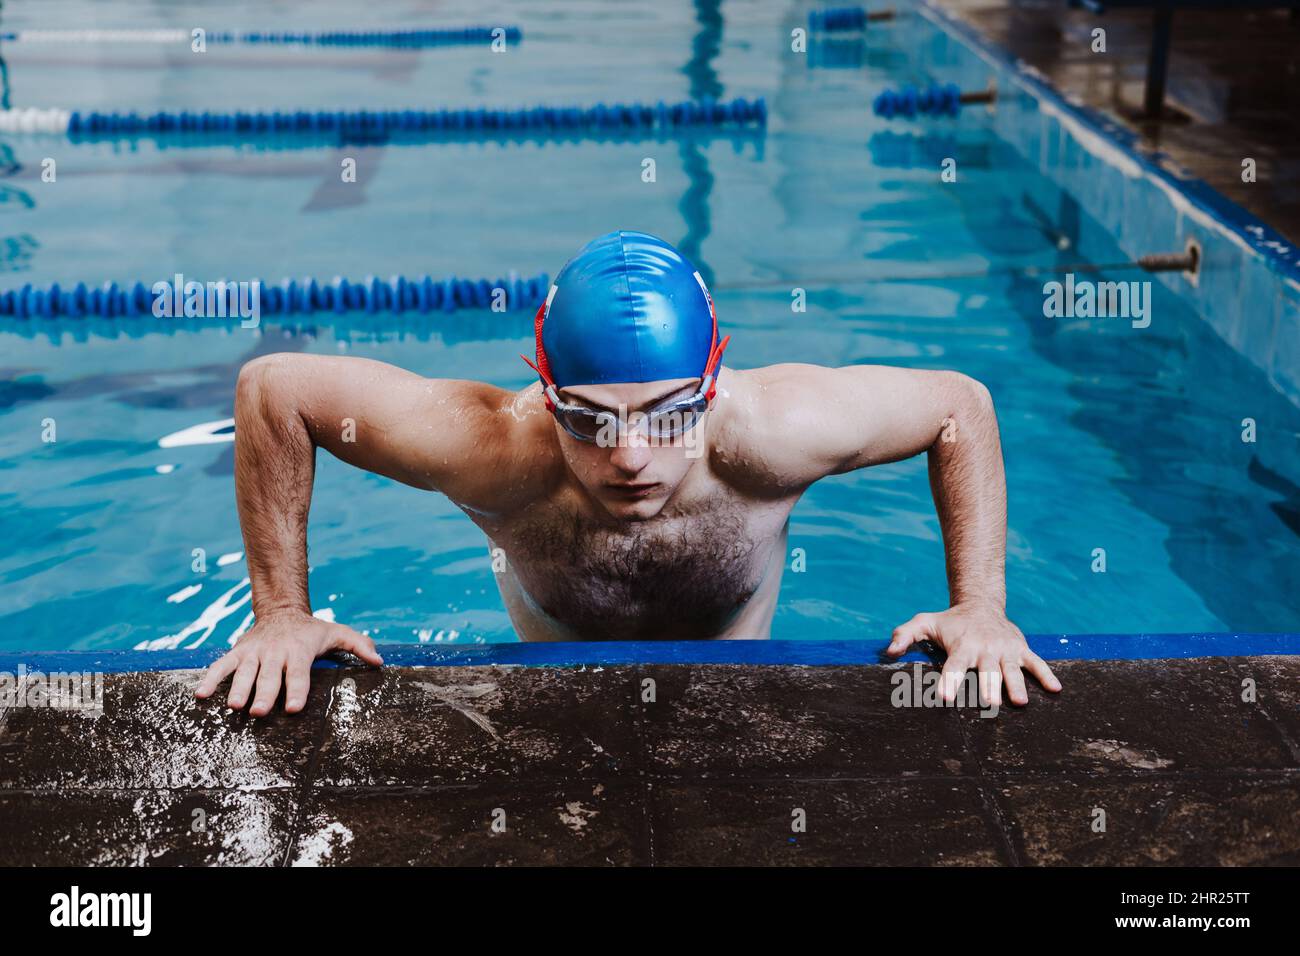 latin young man teenager swimmer athlete wearing cap and goggles in a swimming training in the Pool in Mexico Latin America Stock Photo